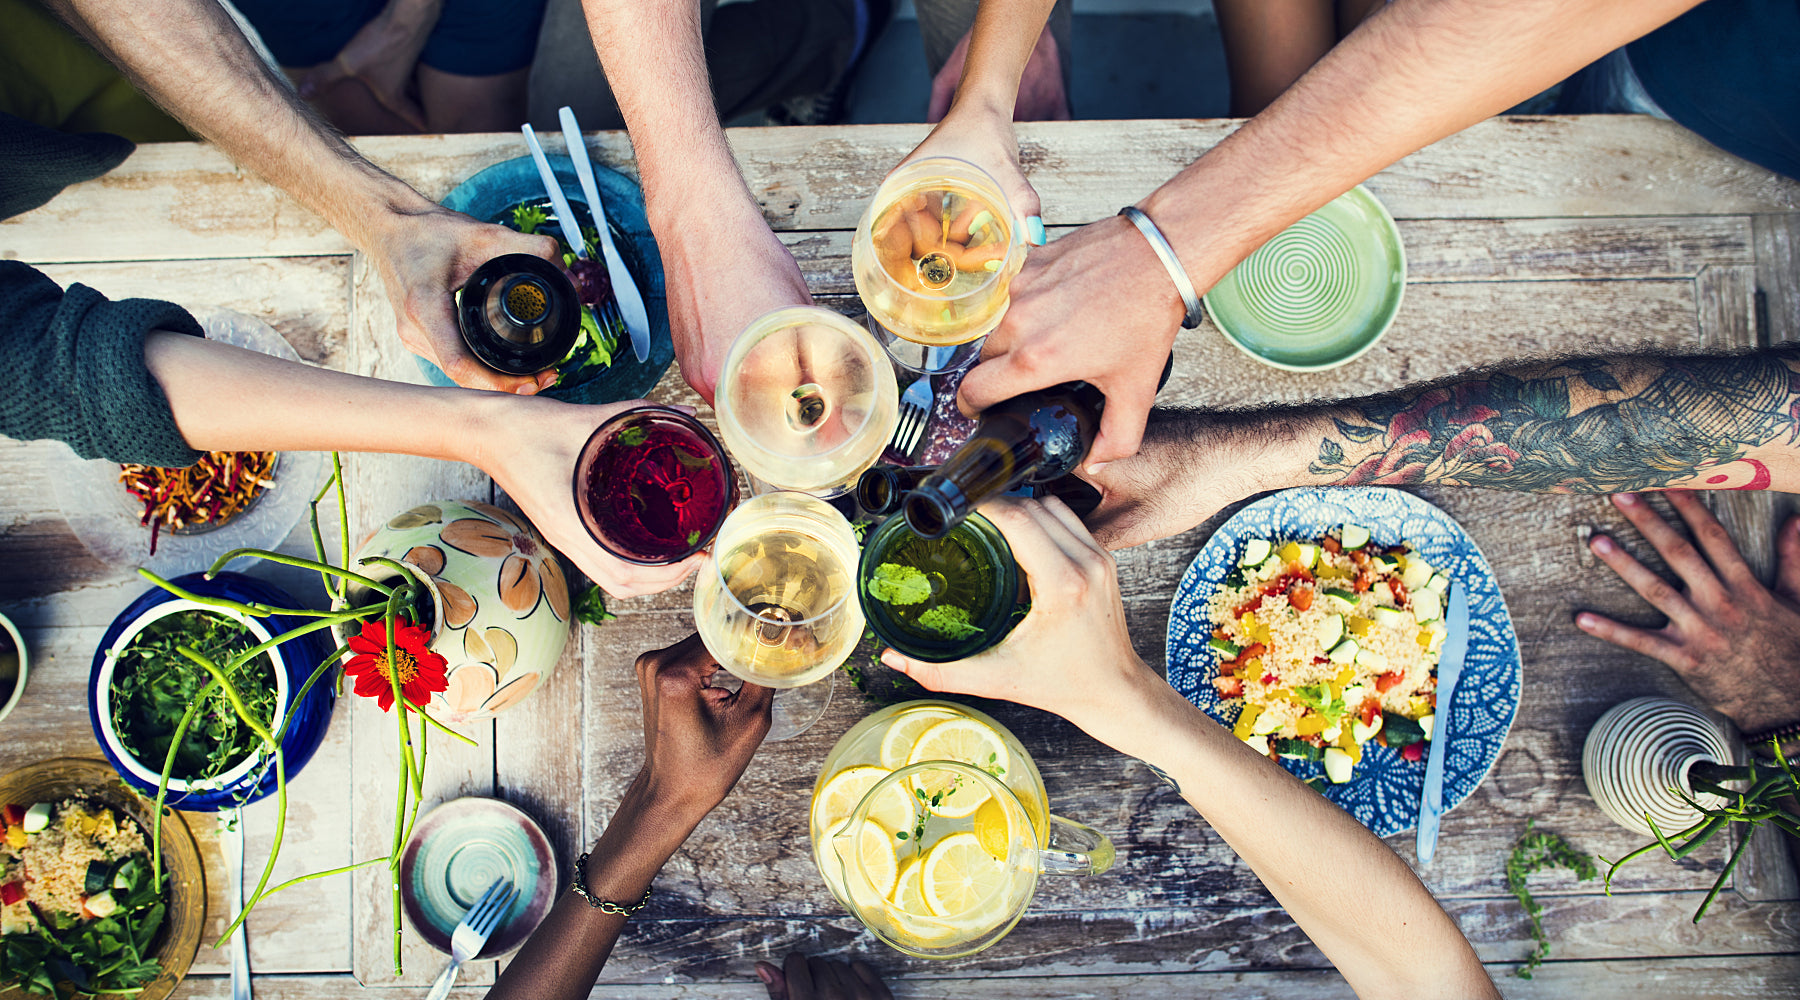 Top Tips for Socializing Without Setbacks This Spring and Summer